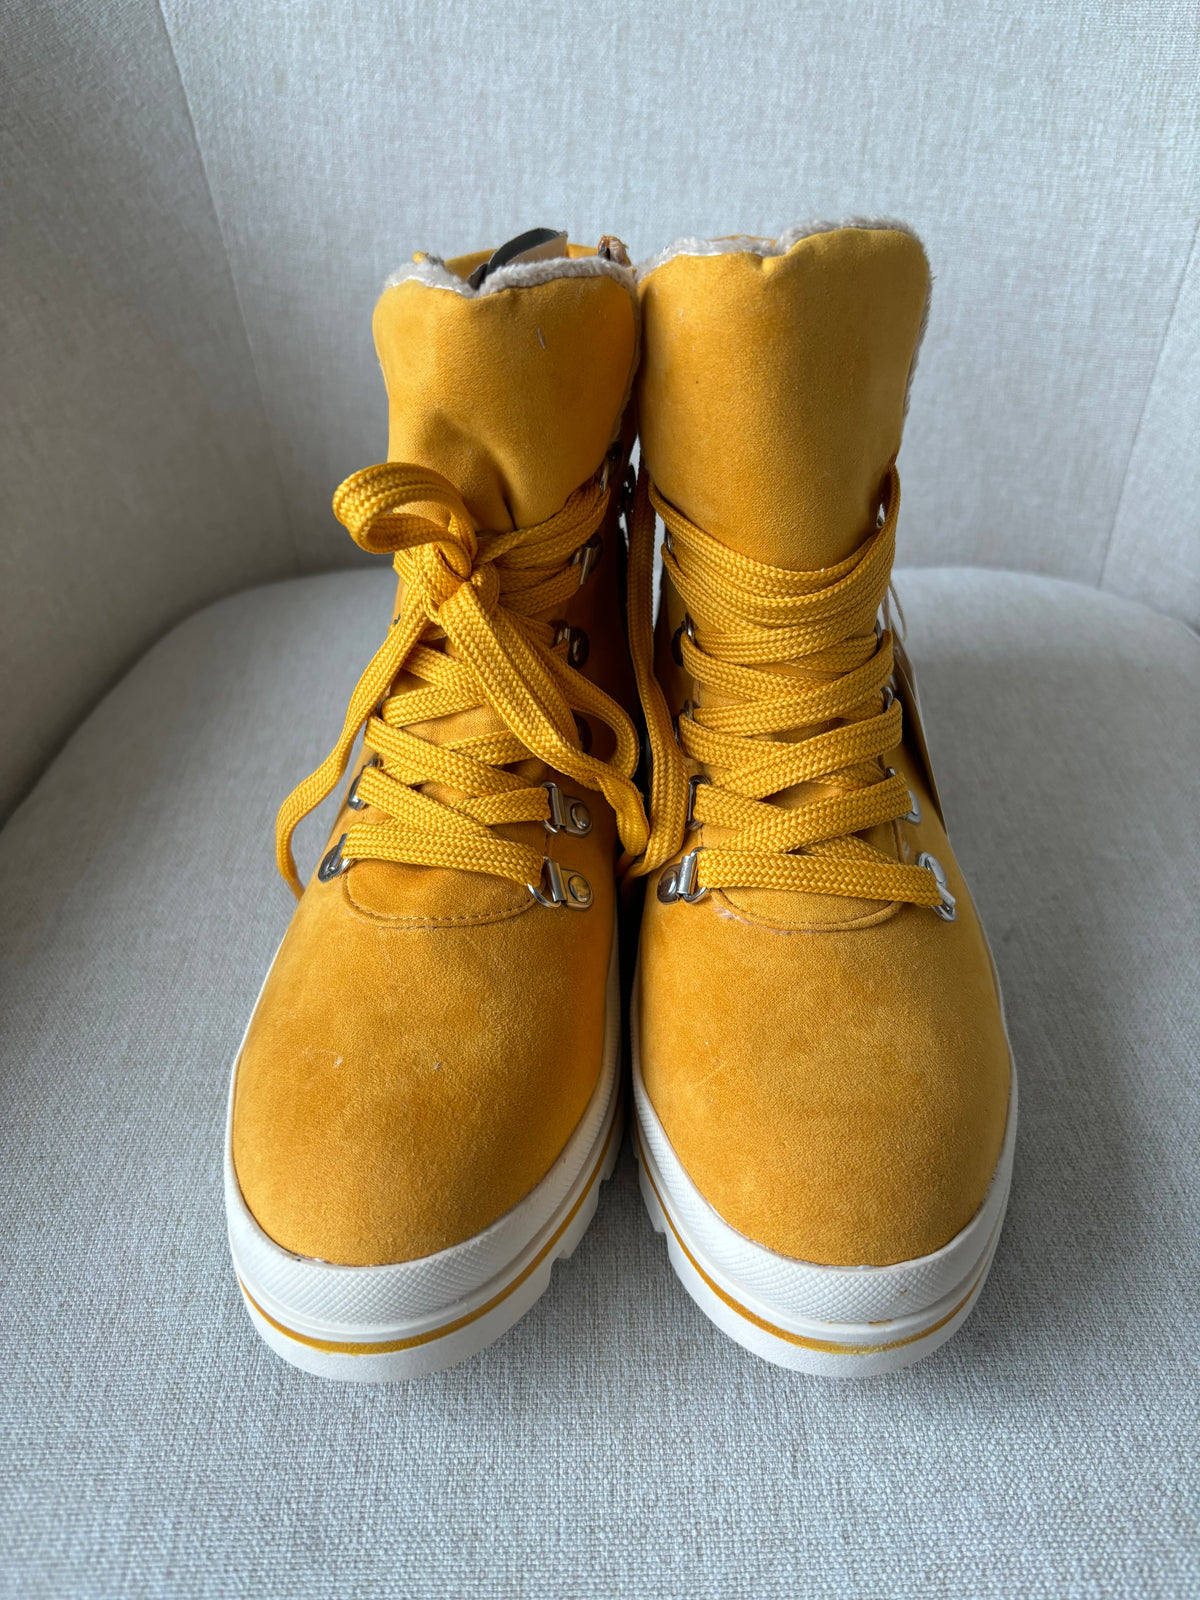 Mustard Yellow Lined Boots by Tom Tailor